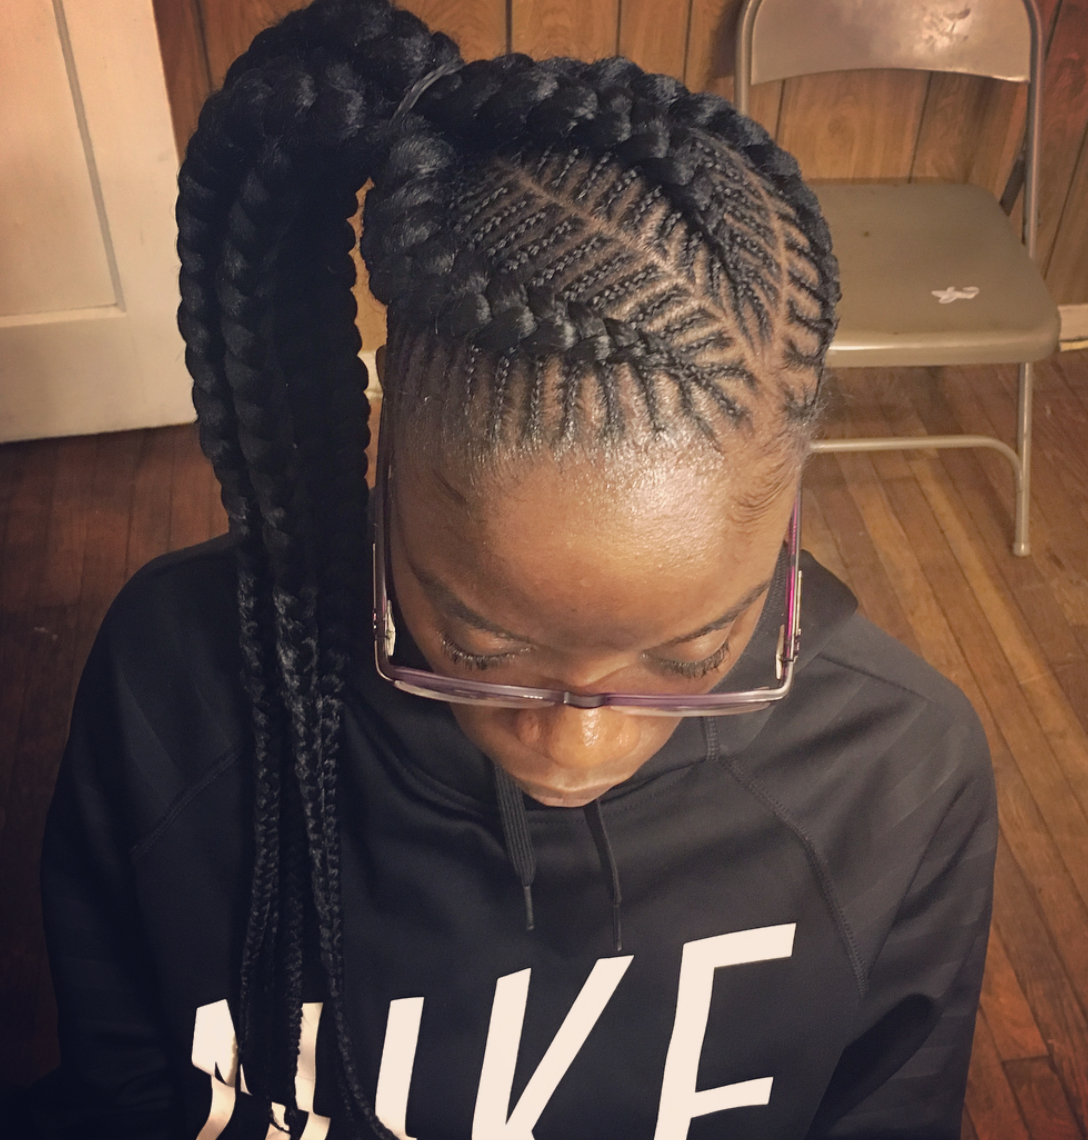 fishbone braids with side ponytail.png 1088×1140